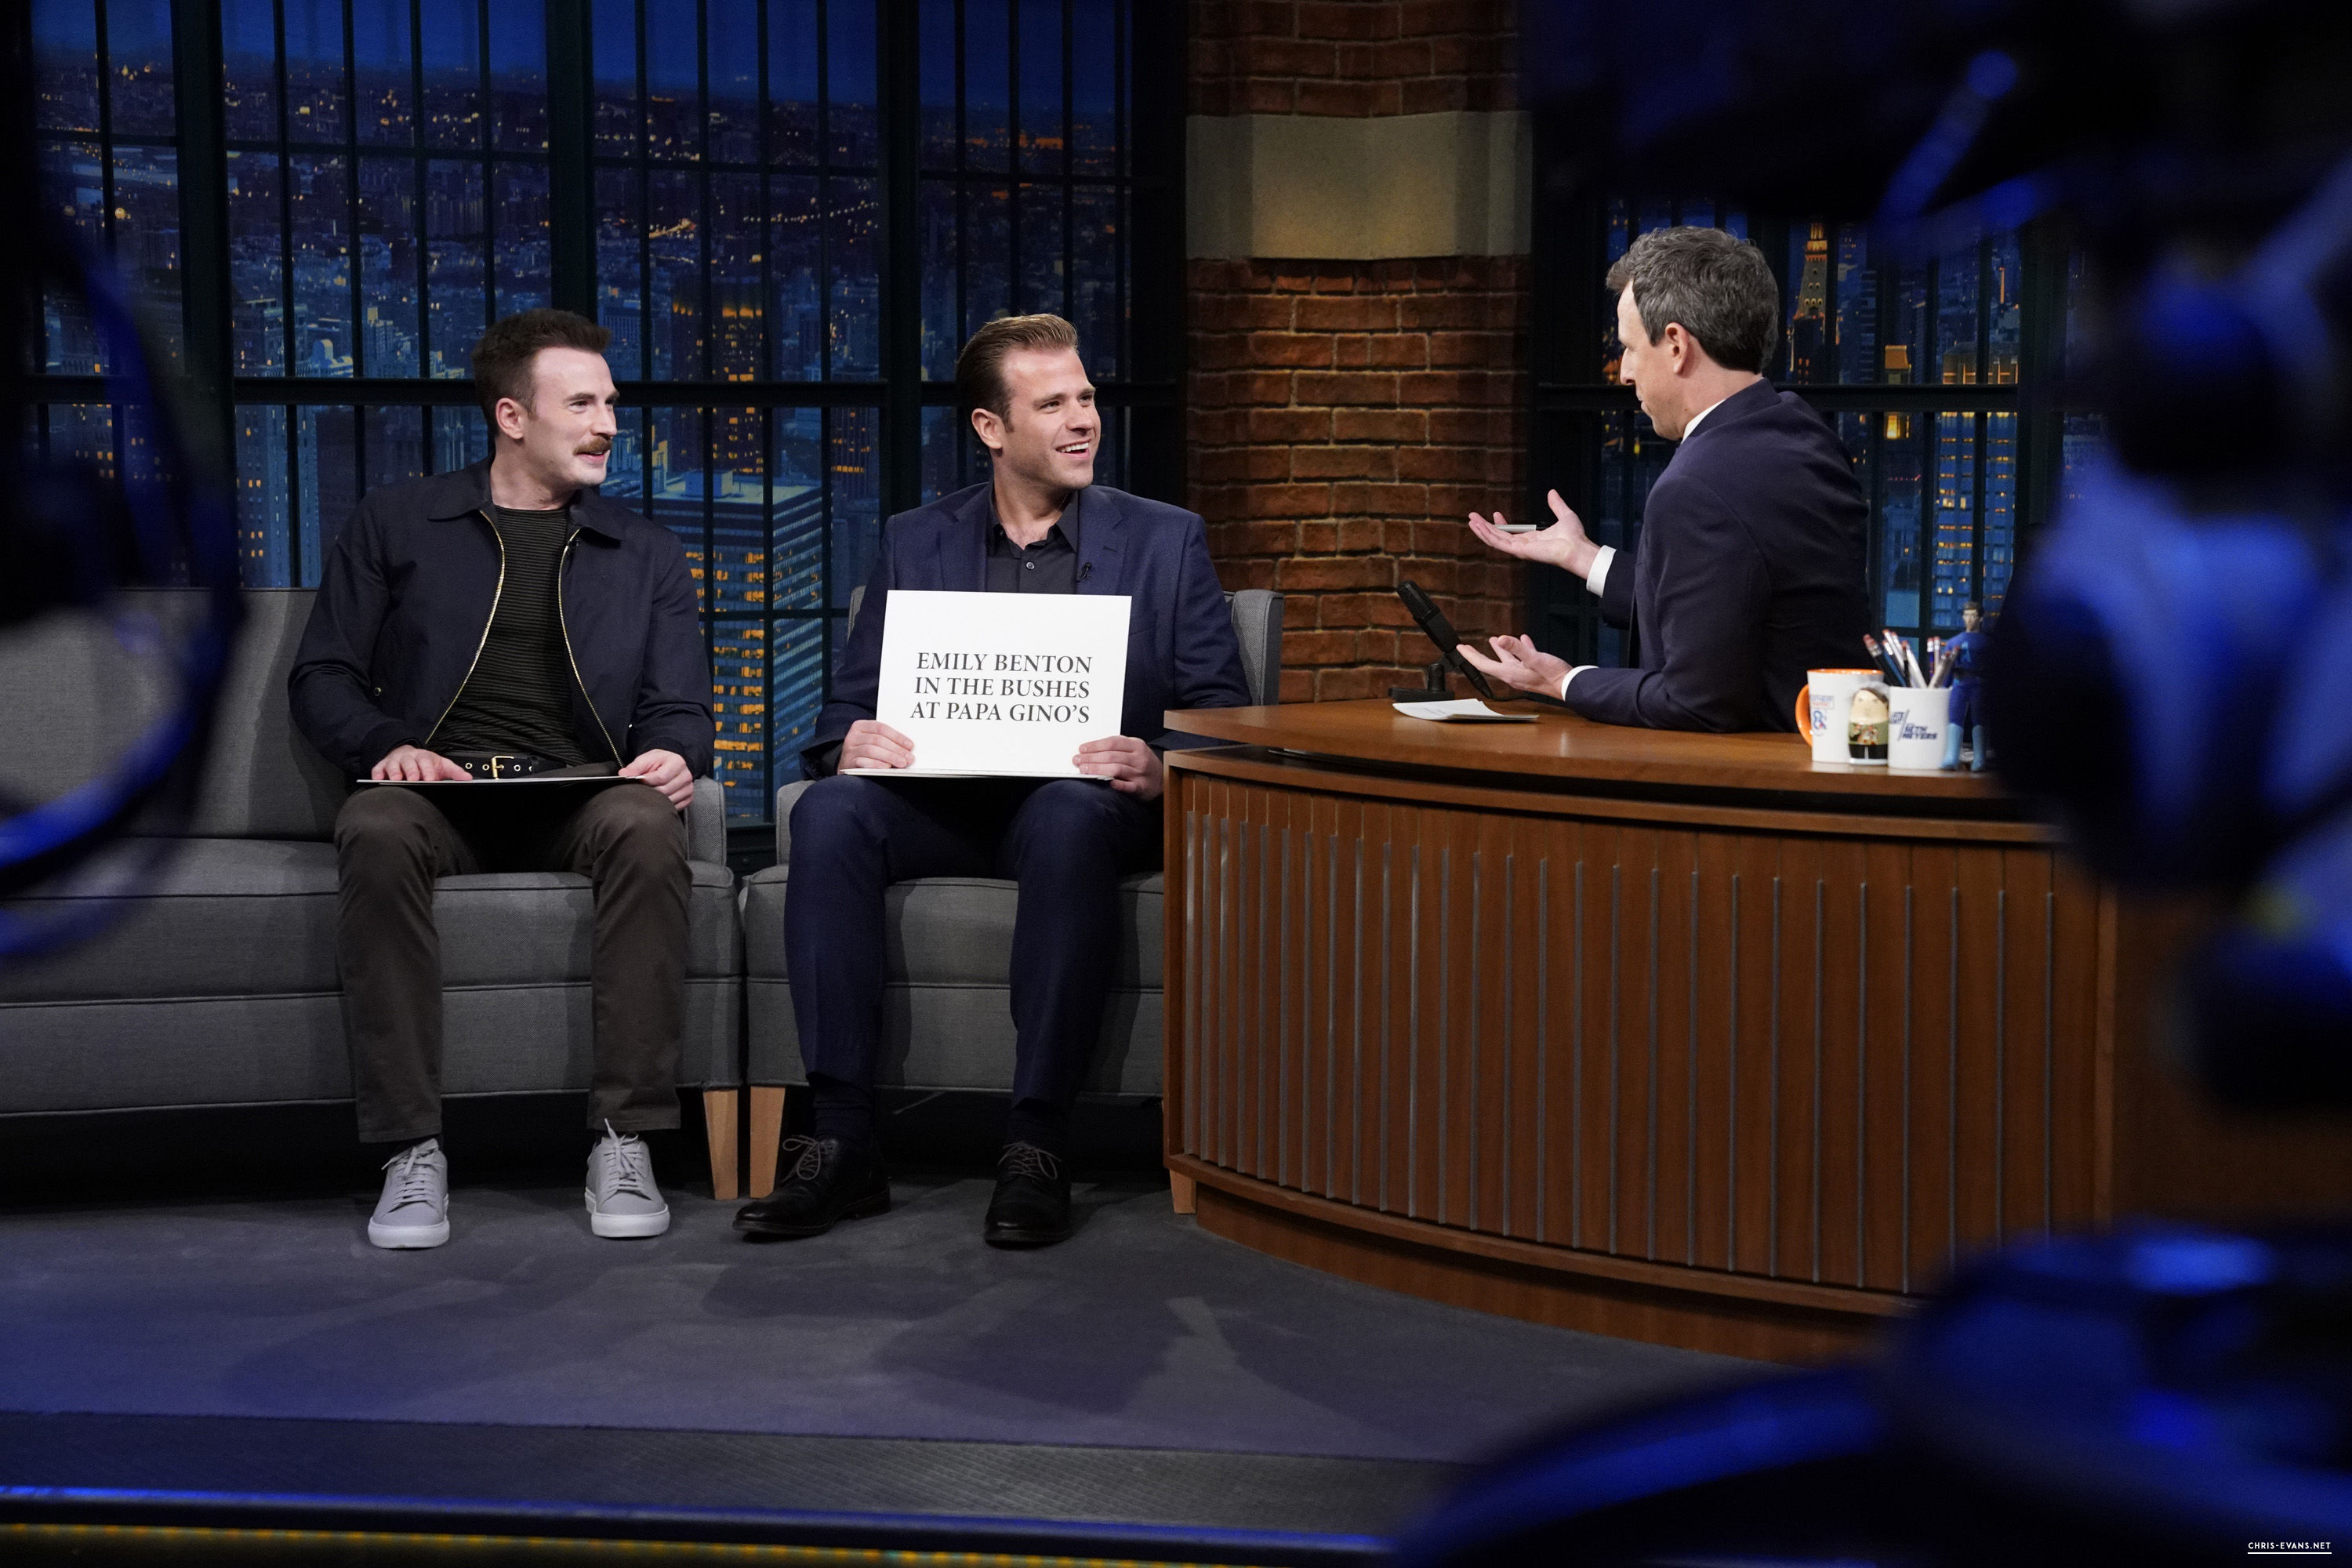 http://chris-evans.net/photos/albums/Appearances/2018/04%2023%20Late%20Night%20with%20Seth%20Meyers/009.jpg